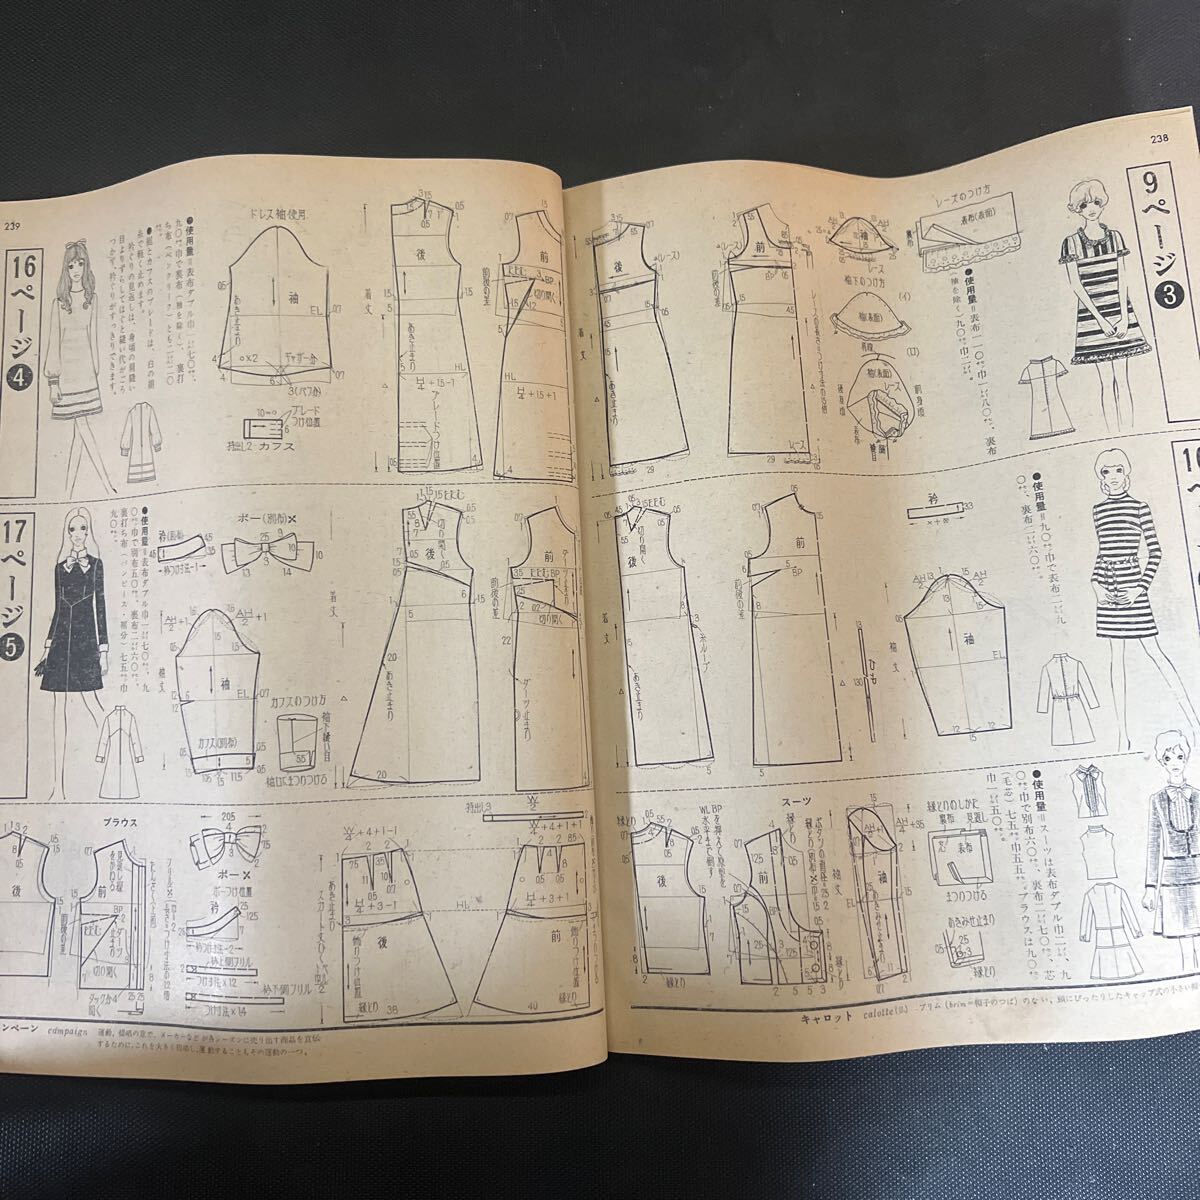  equipment . magazine so-en 1967 year 12 month number culture clothes equipment .. publish department Showa era 42 year that time thing Vintage rare retro secondhand book Showa Retro attire research appendix attaching coat 